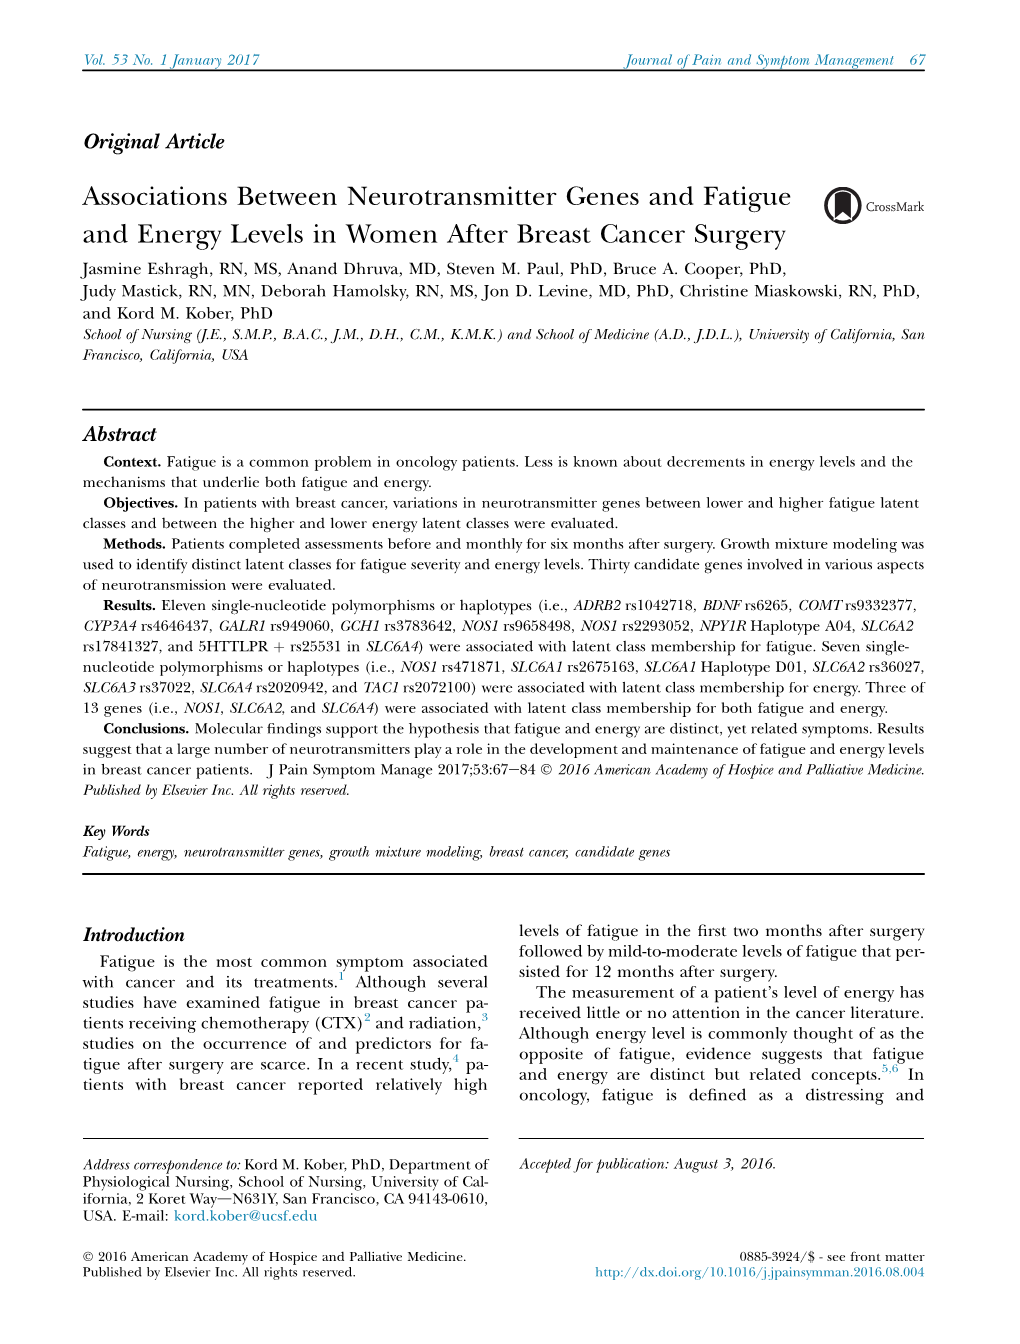 Associations Between Neurotransmitter Genes and Fatigue and Energy Levels in Women After Breast Cancer Surgery Jasmine Eshragh, RN, MS, Anand Dhruva, MD, Steven M